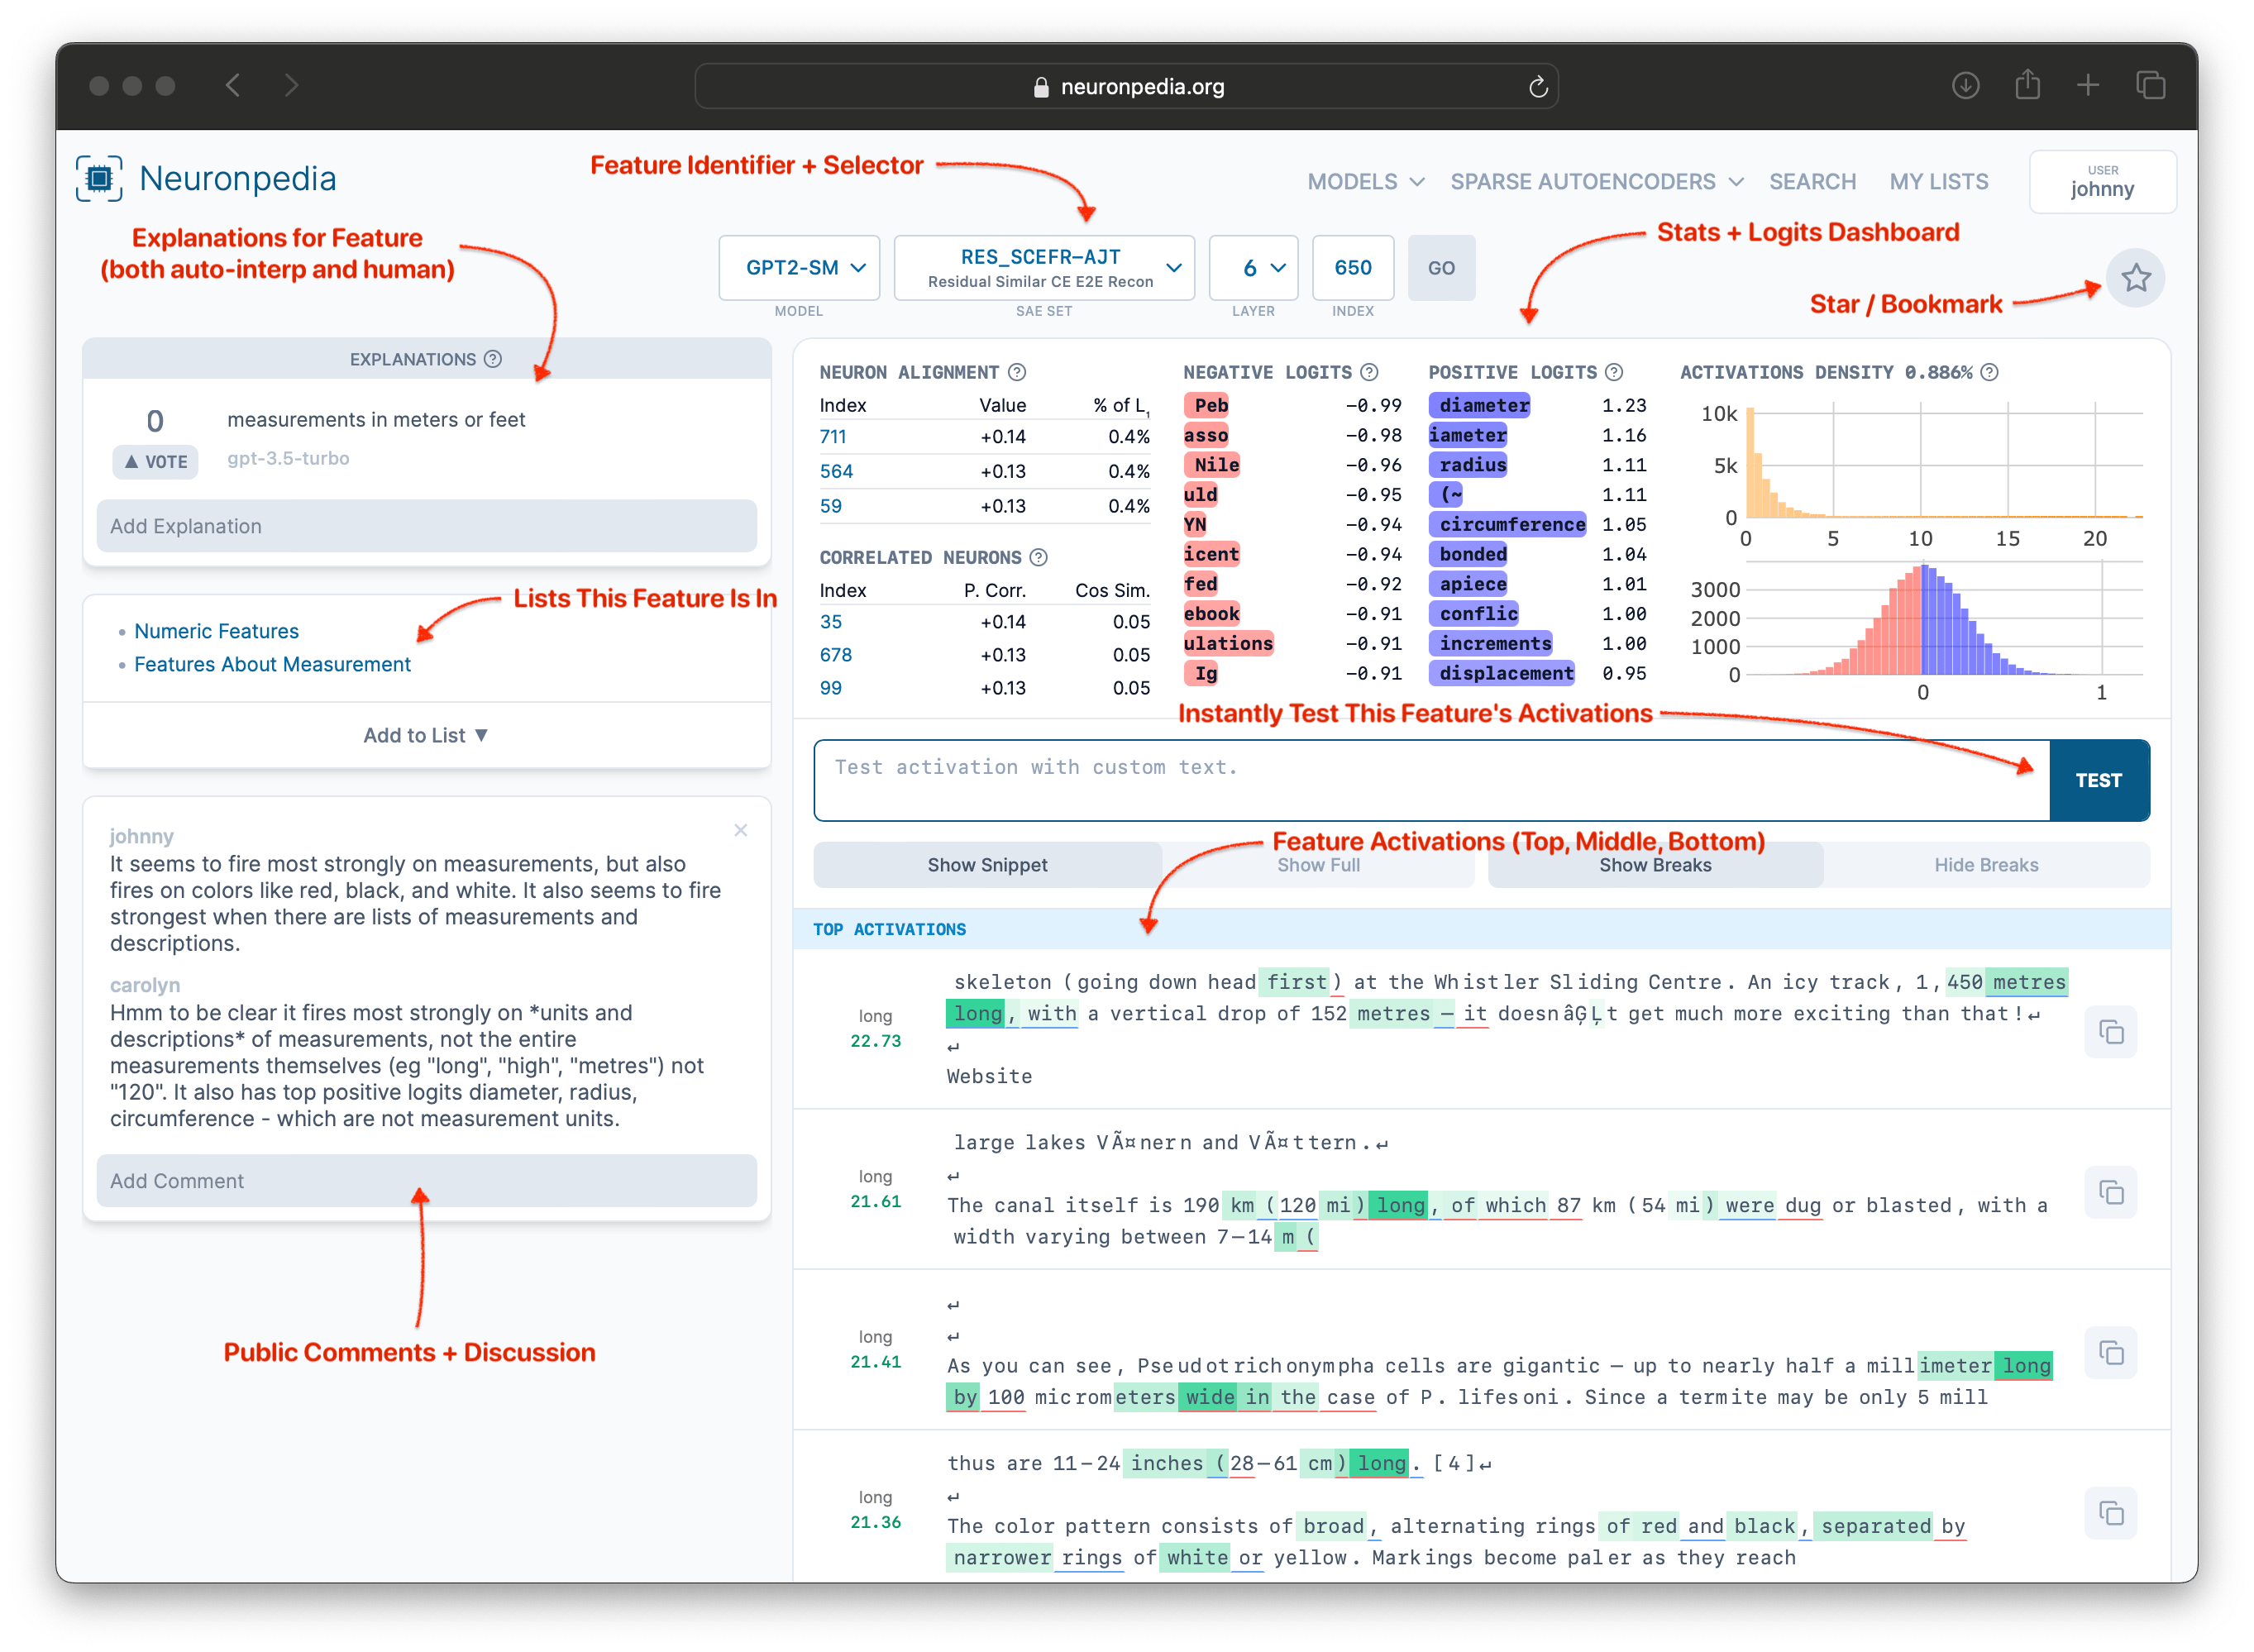 Screenshot of a feature dashboard at https://www.neuronpedia.org/gpt2-small/6-res_scefr-ajt/650